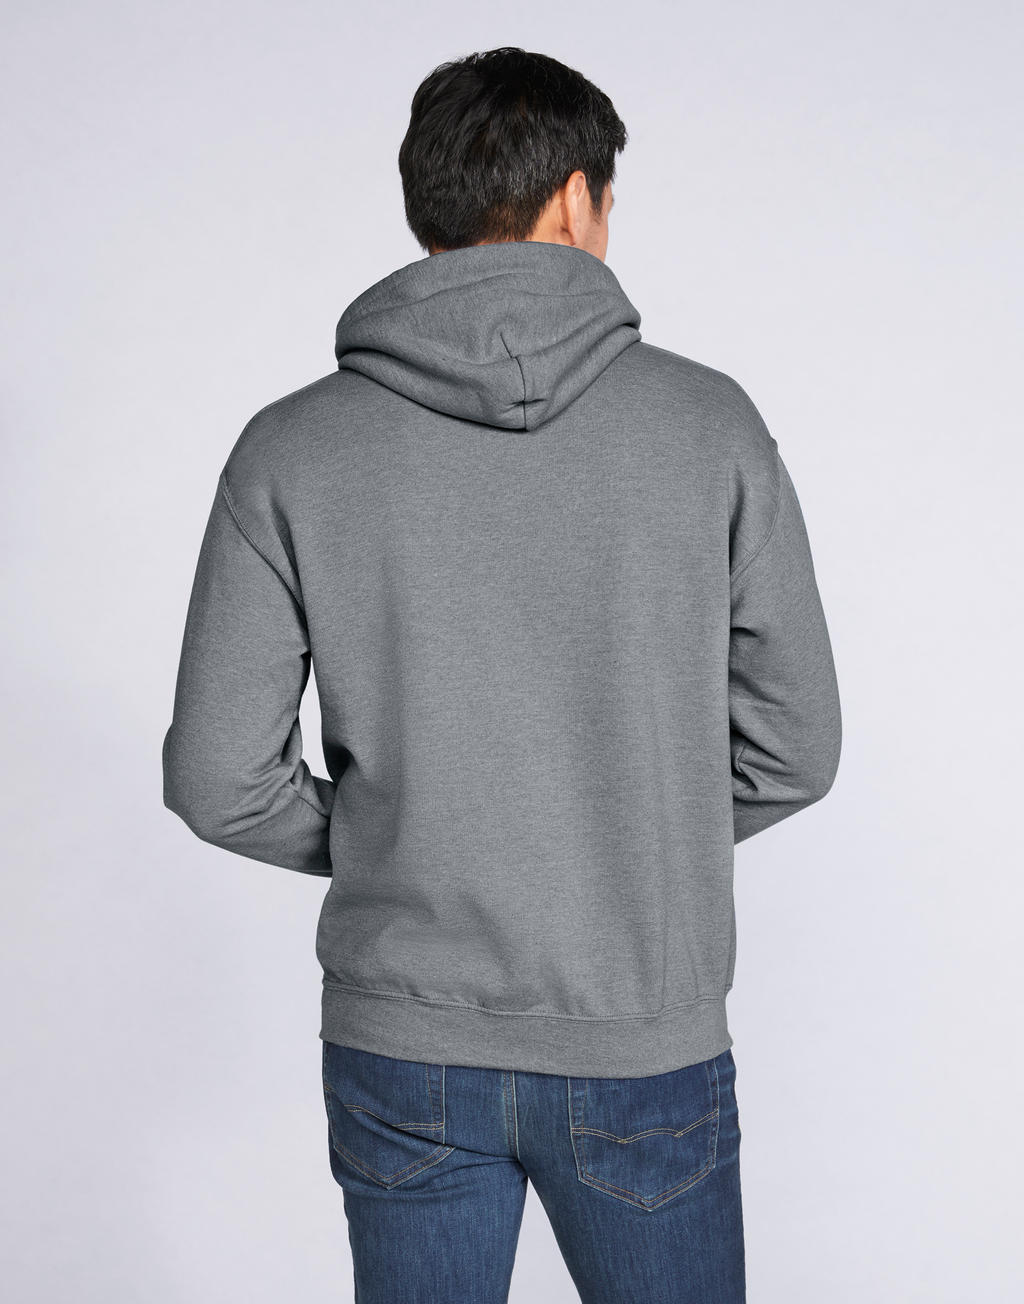  Heavy Blend? Hooded Sweat in Farbe White